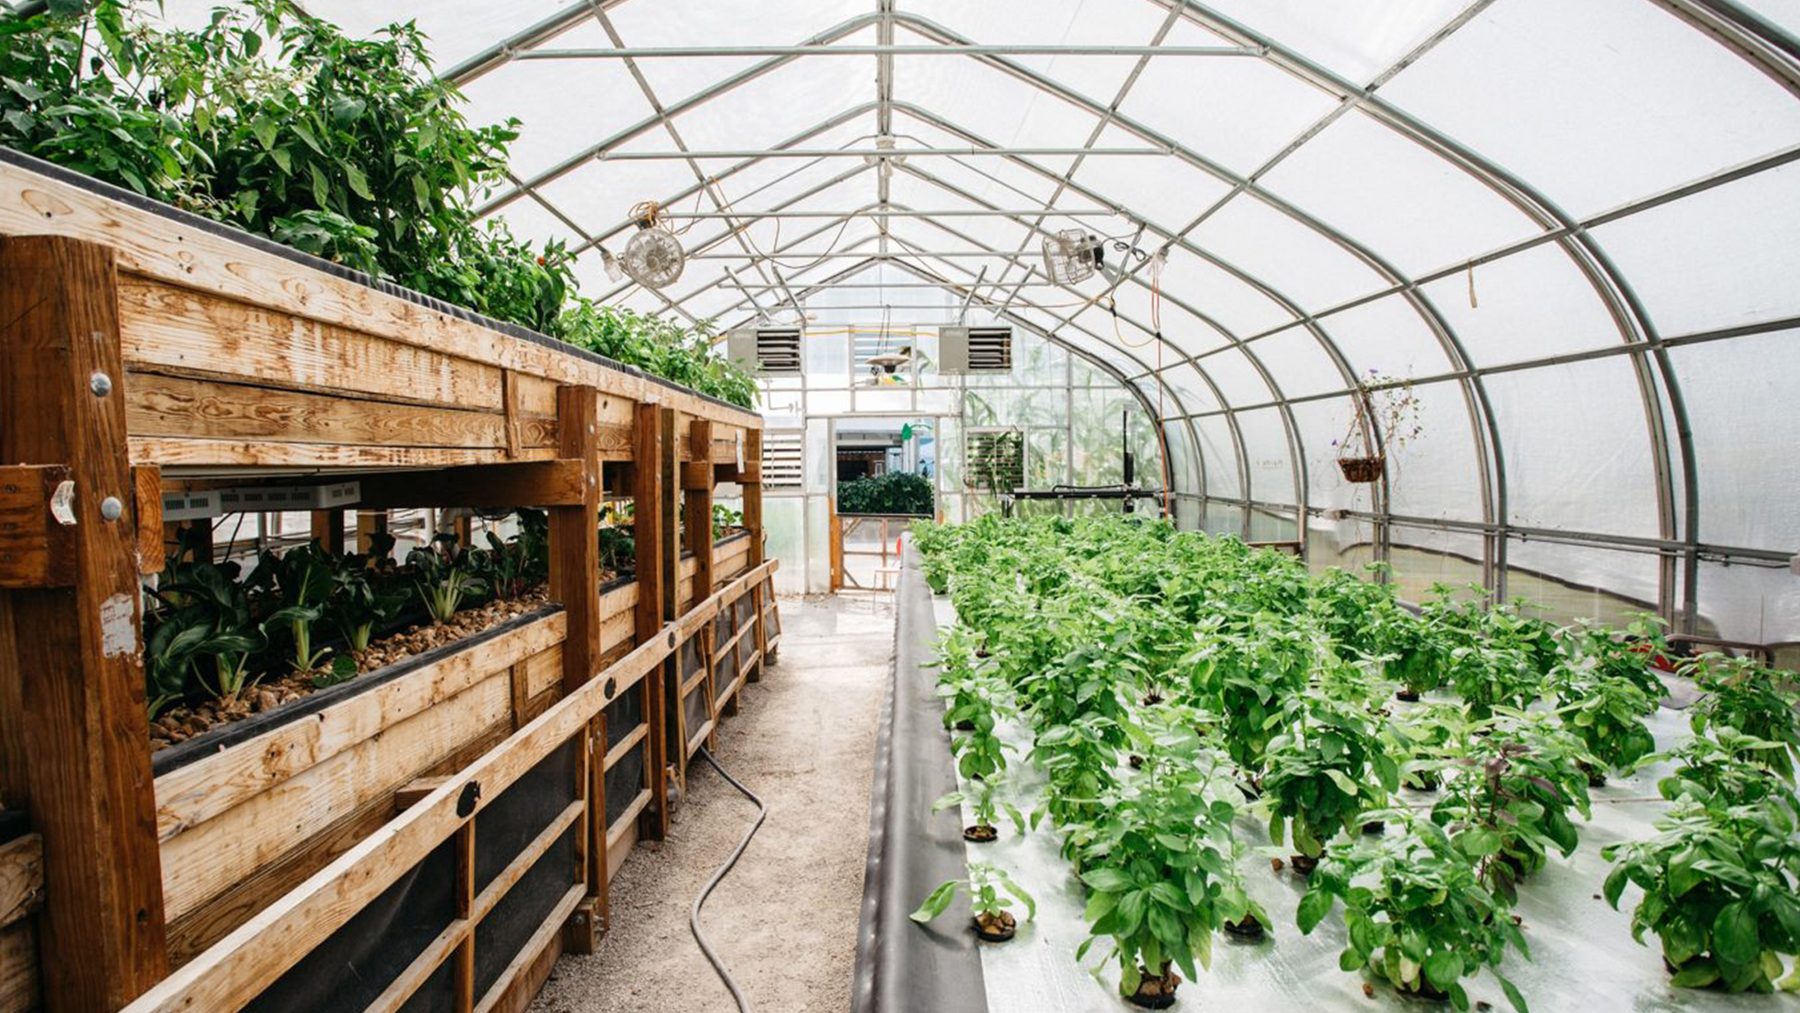 Cannabis Growing at Famous U.S. Agricultural Learning Center